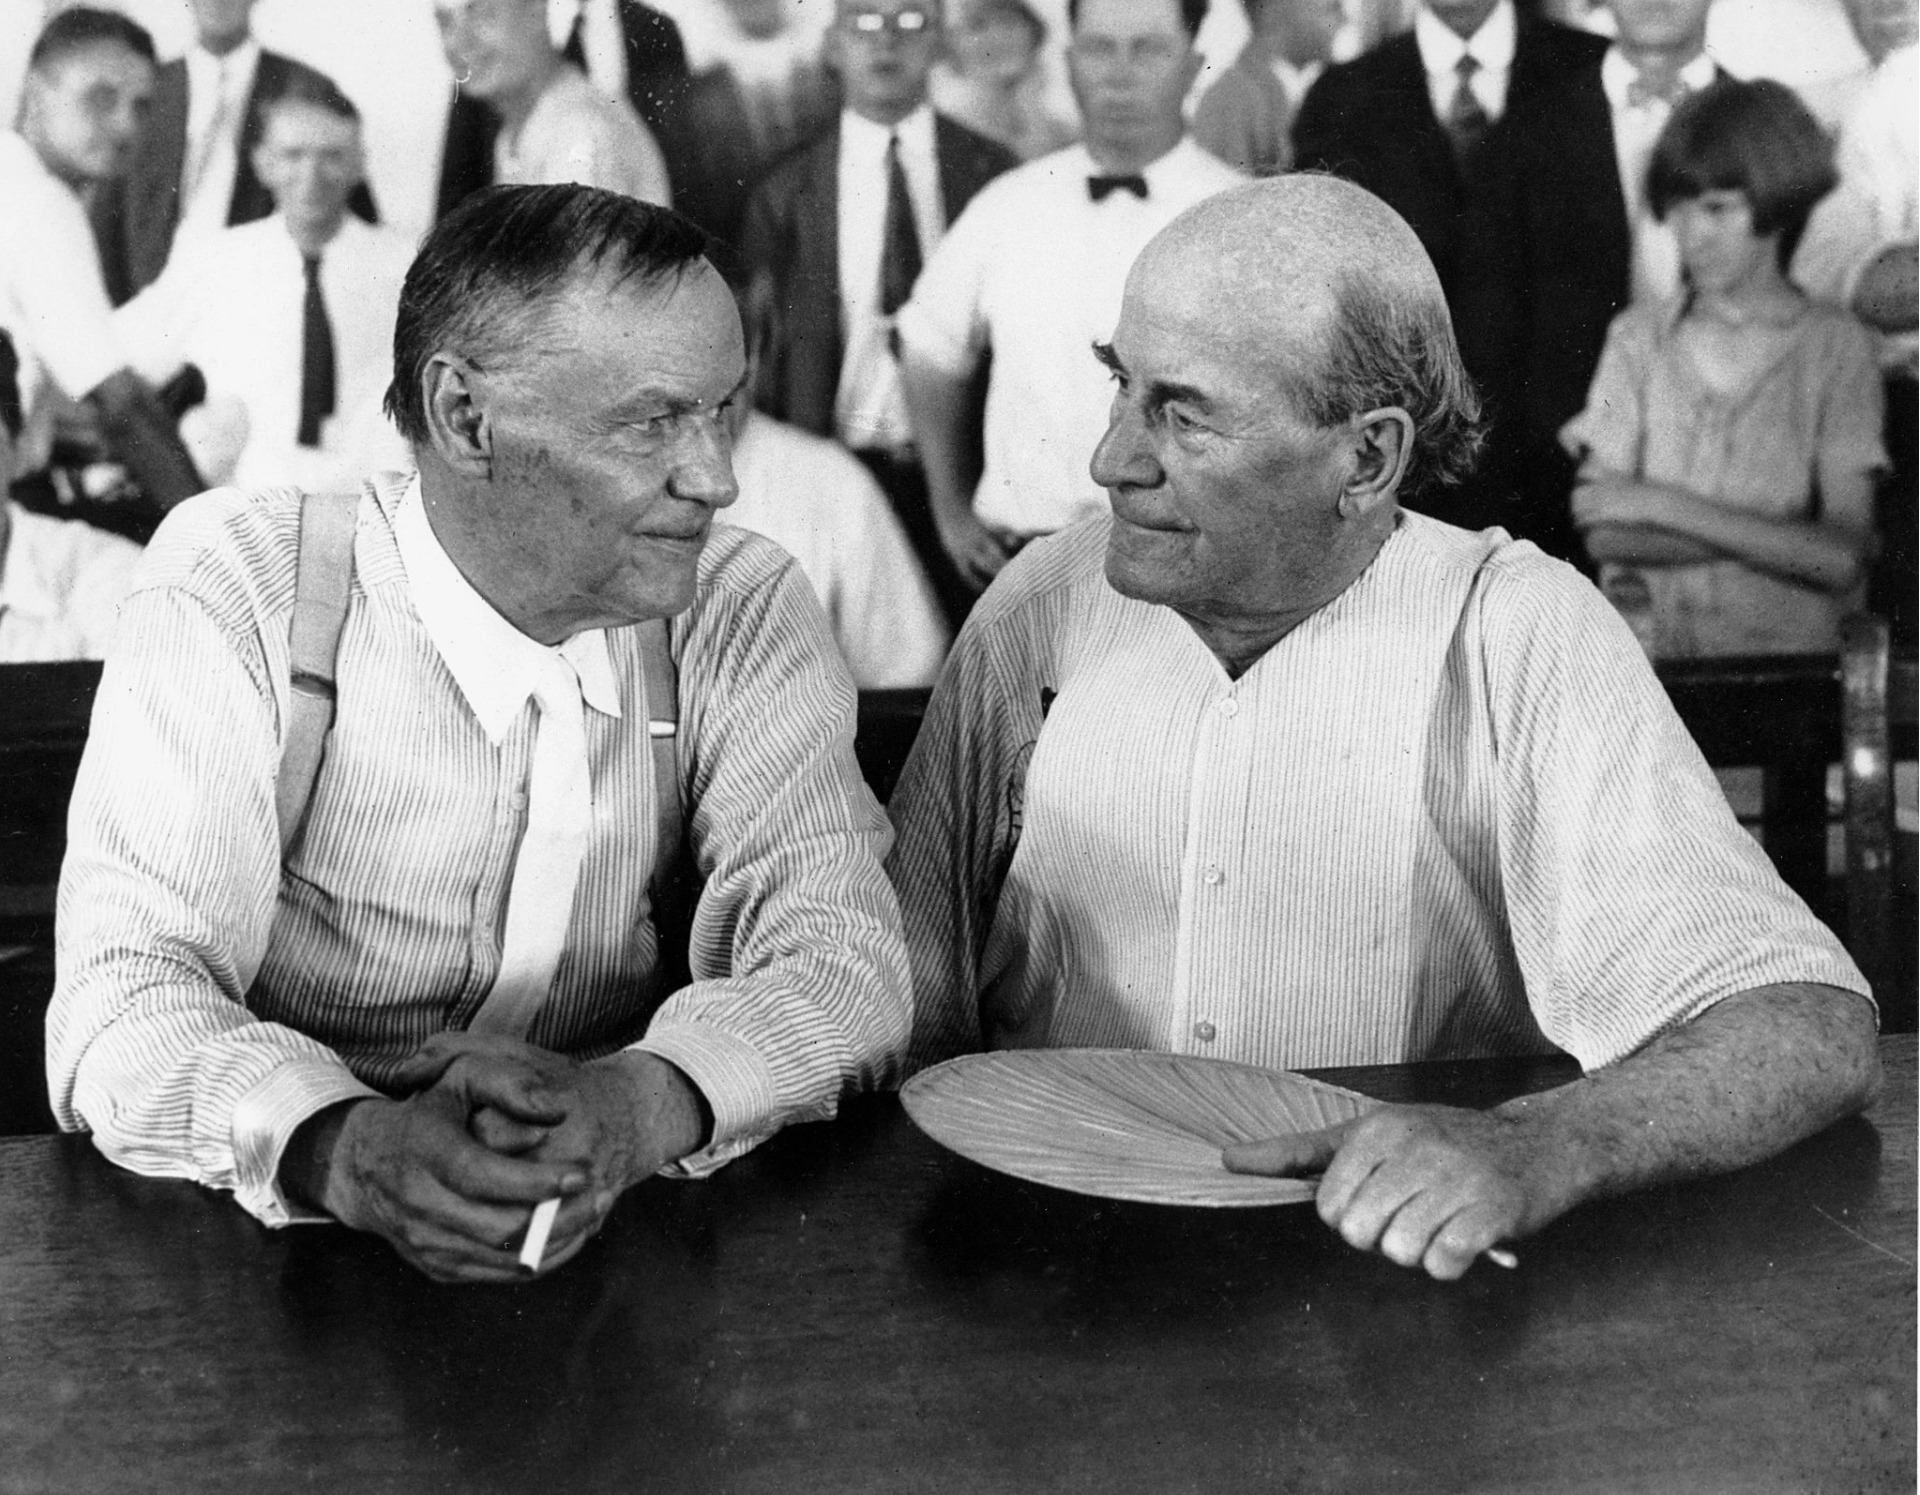 Clarence Darrow, left, and William Jennings Bryan have a conversation during a break from the trial. Courtesy of Wikimedia Commons.